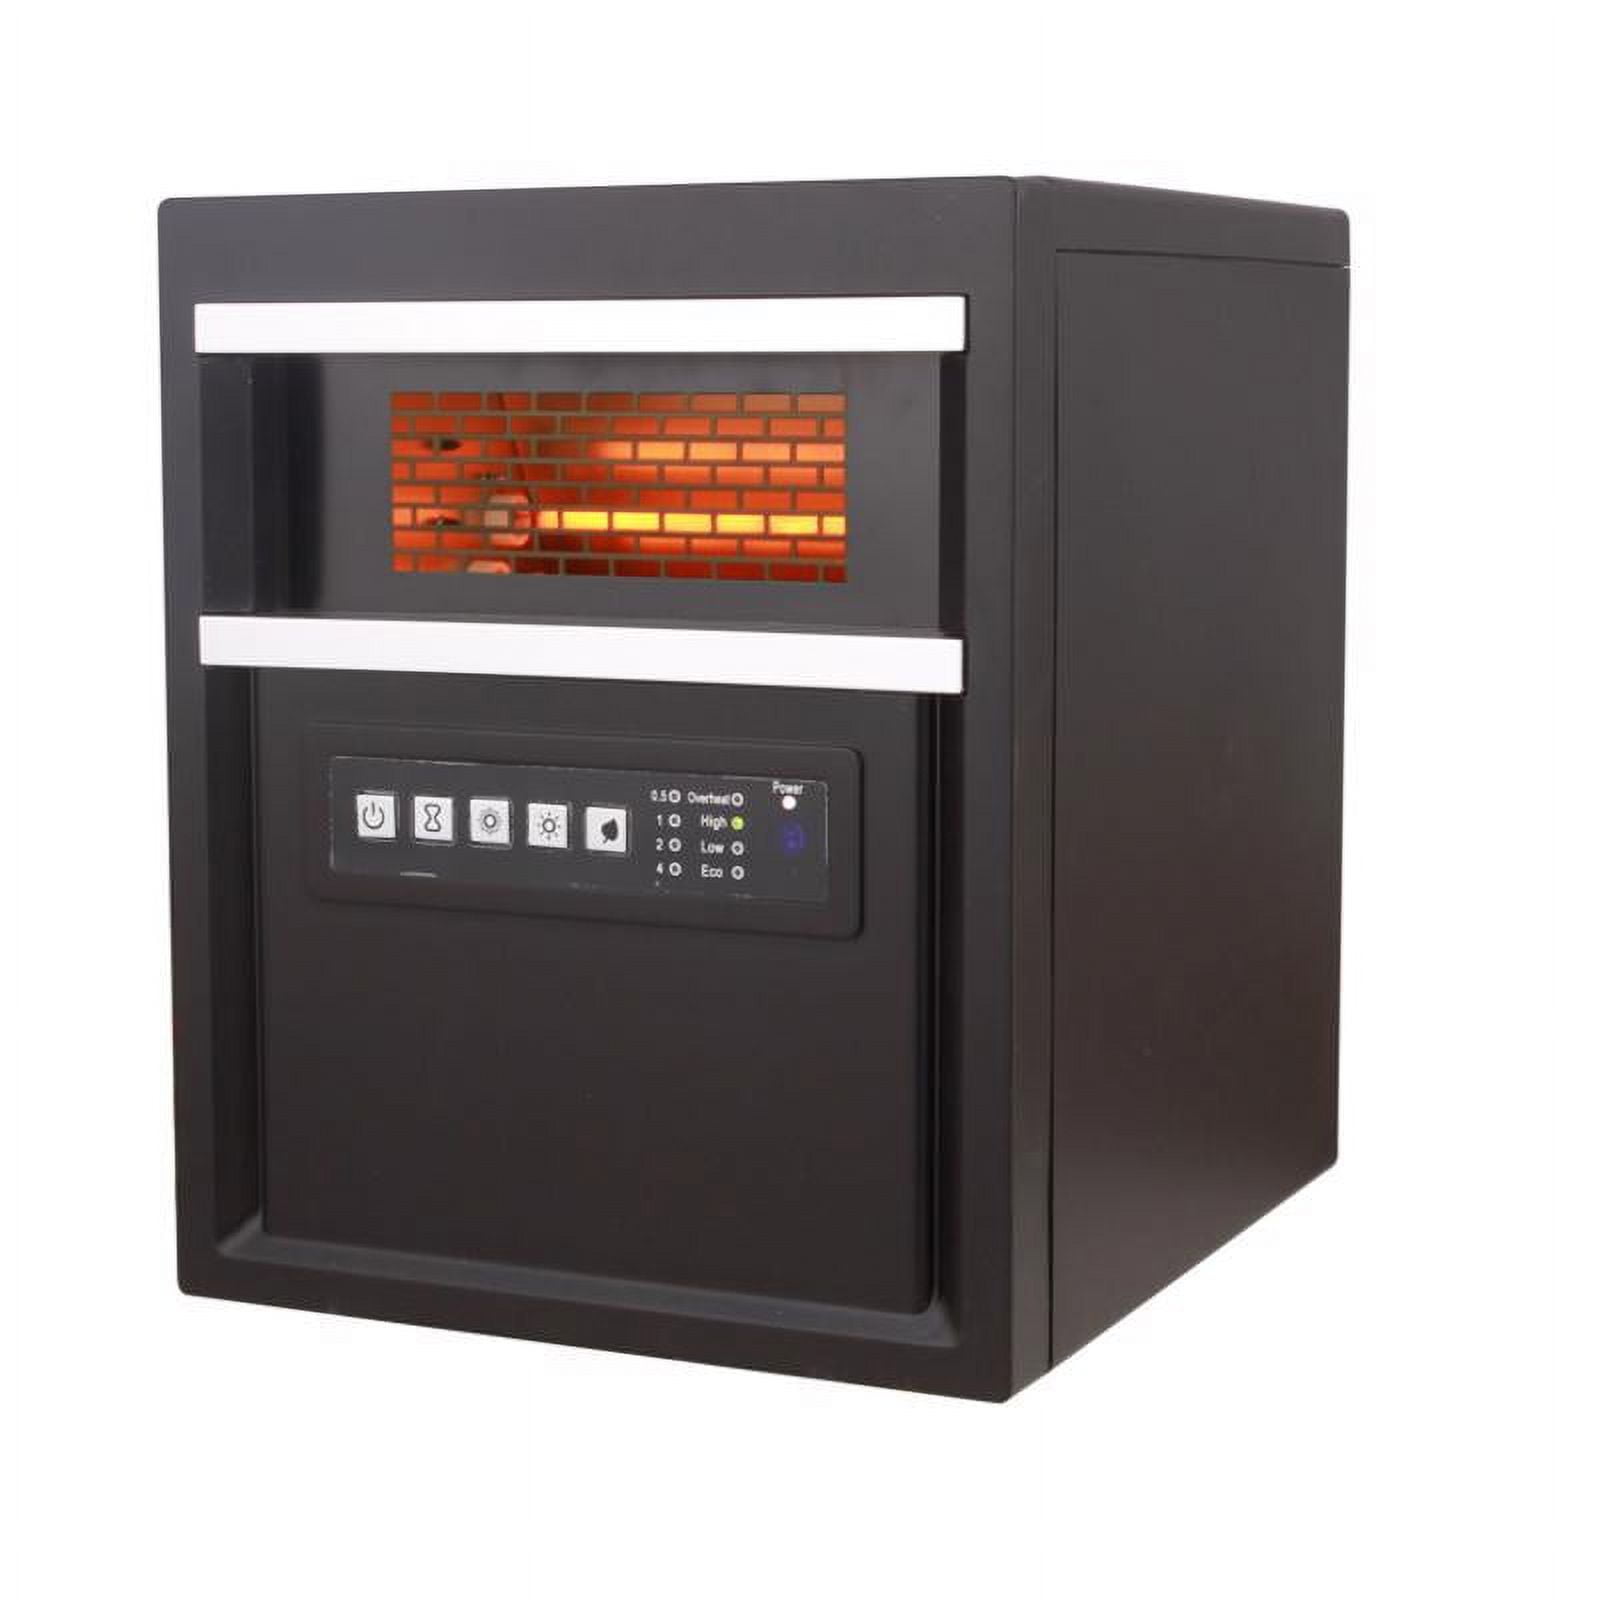 Picture of Perfect Aire 4010535 17 x 14.5 x 12.75 in. Electric Infrared Heater with Remote, Brown